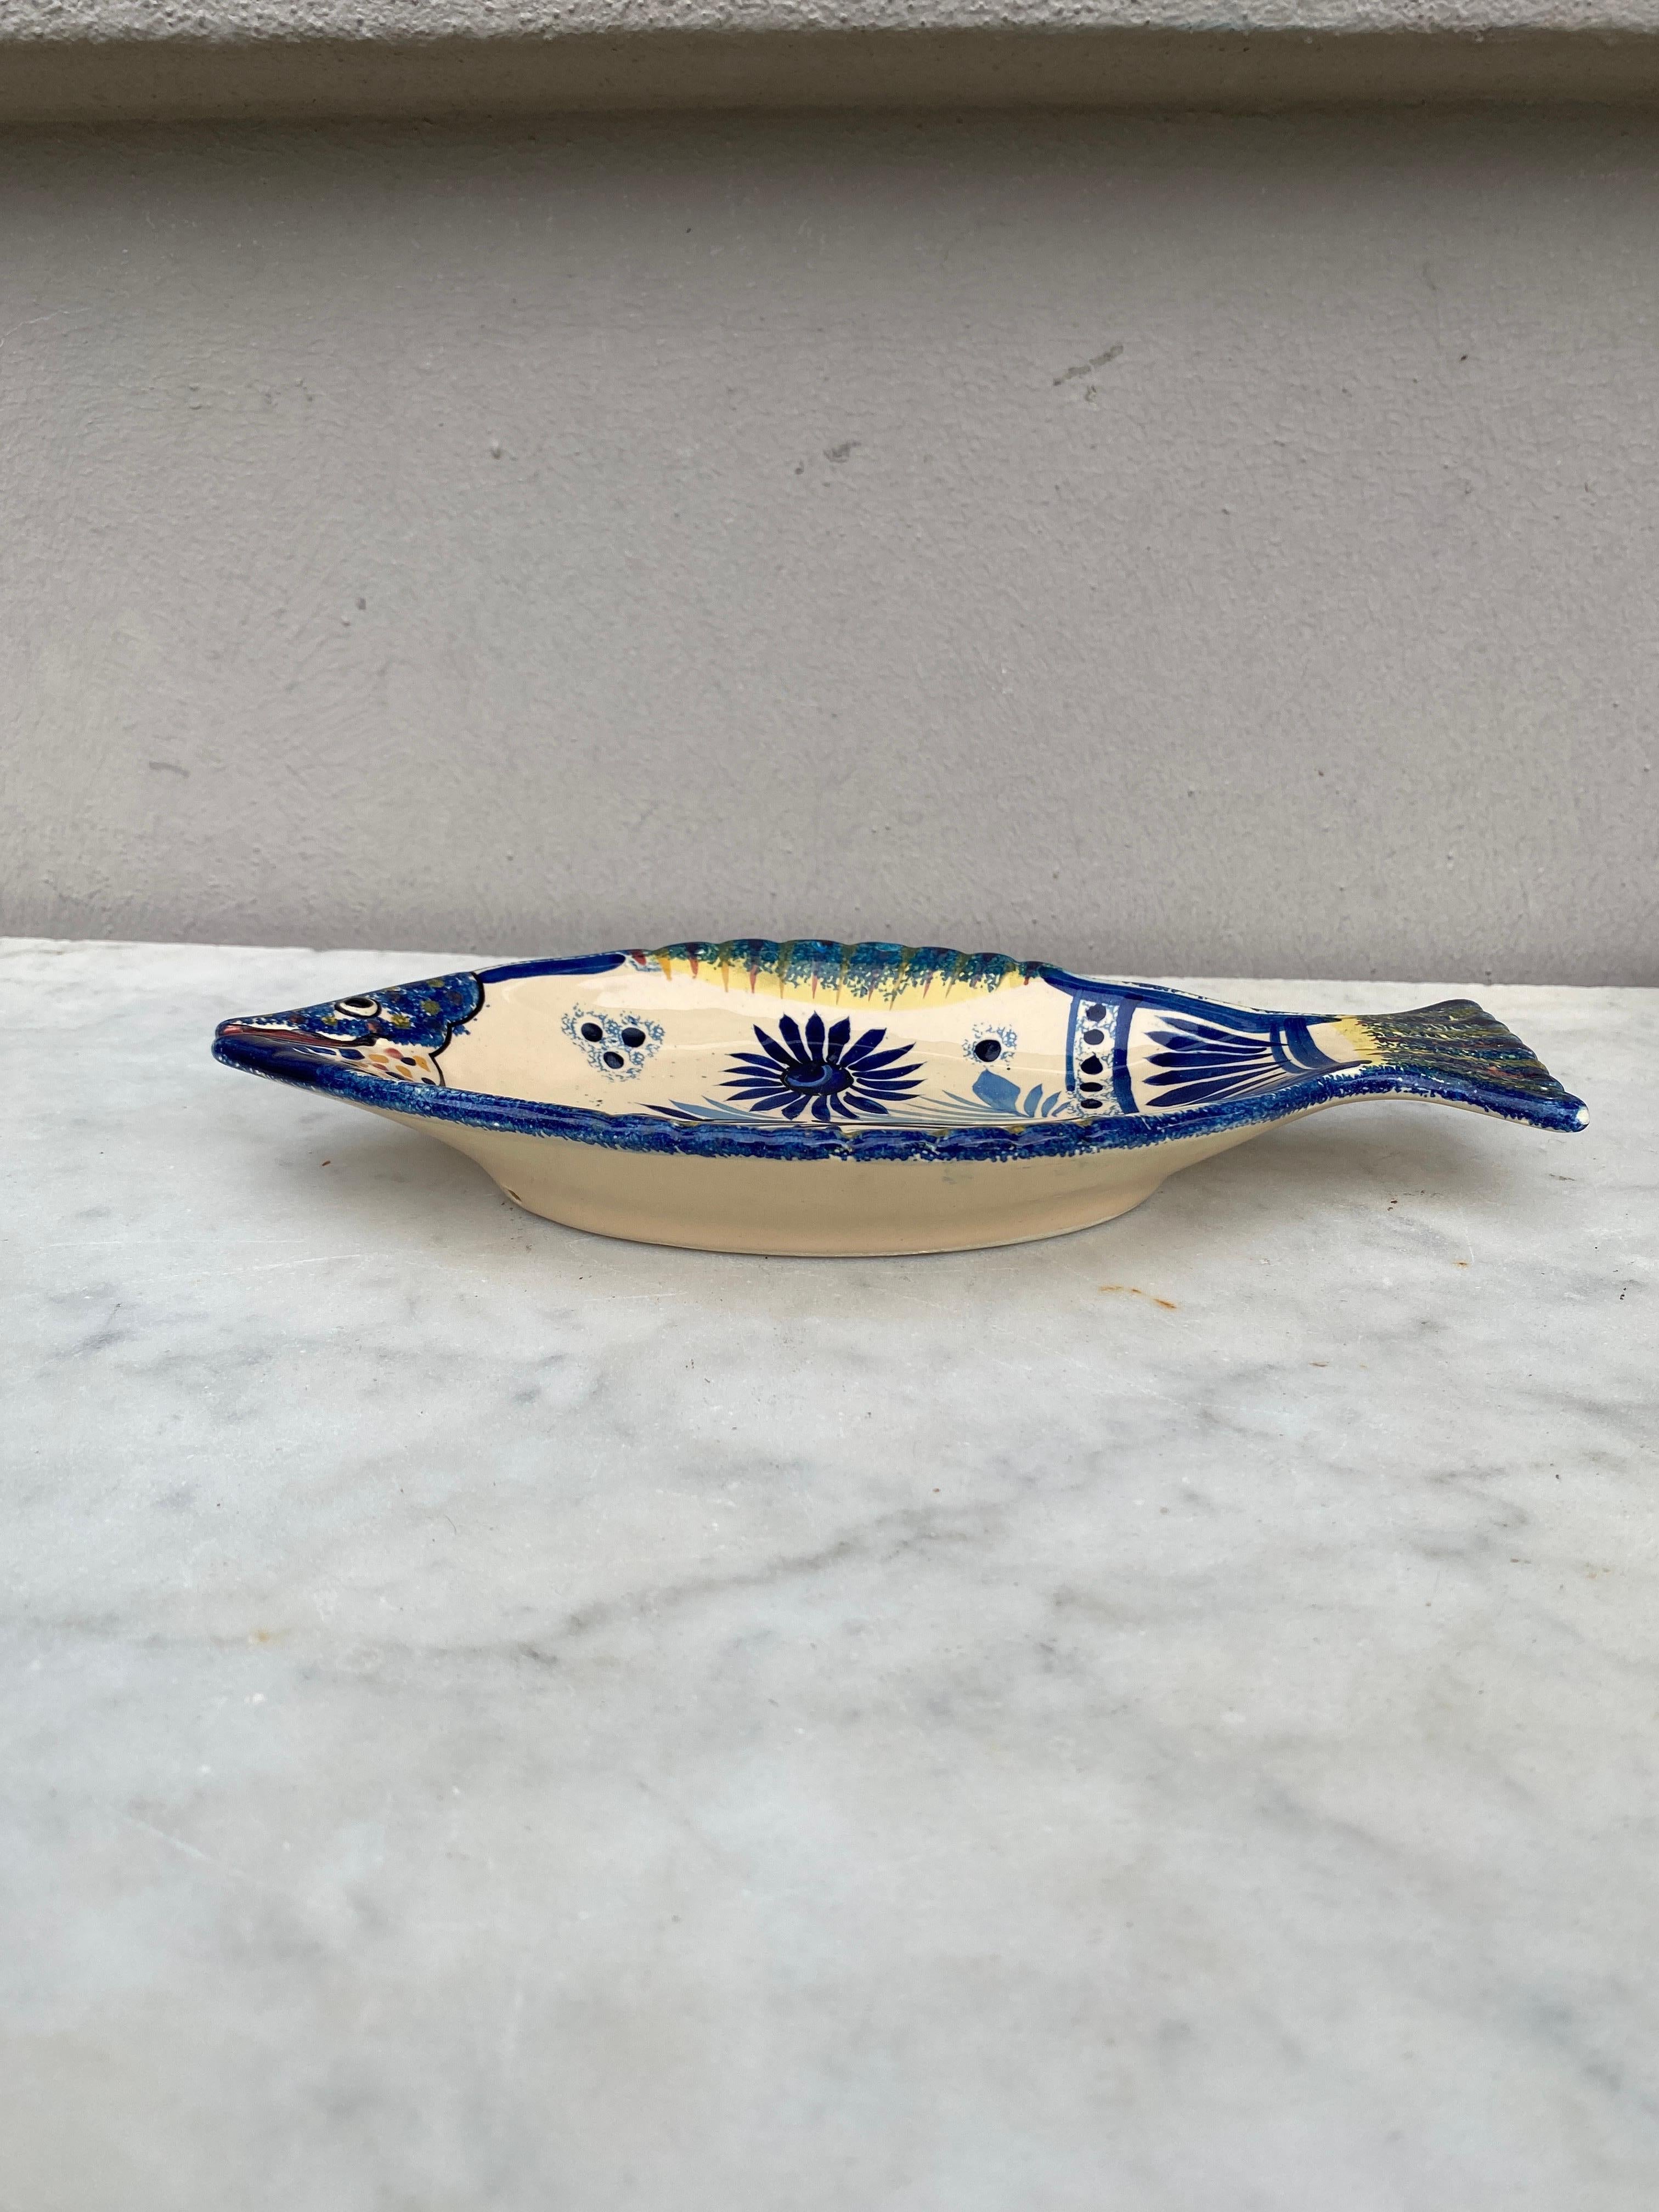 Rustic French Faience Blue & White Fish Platter Henriot Quimper, Circa 1930 For Sale